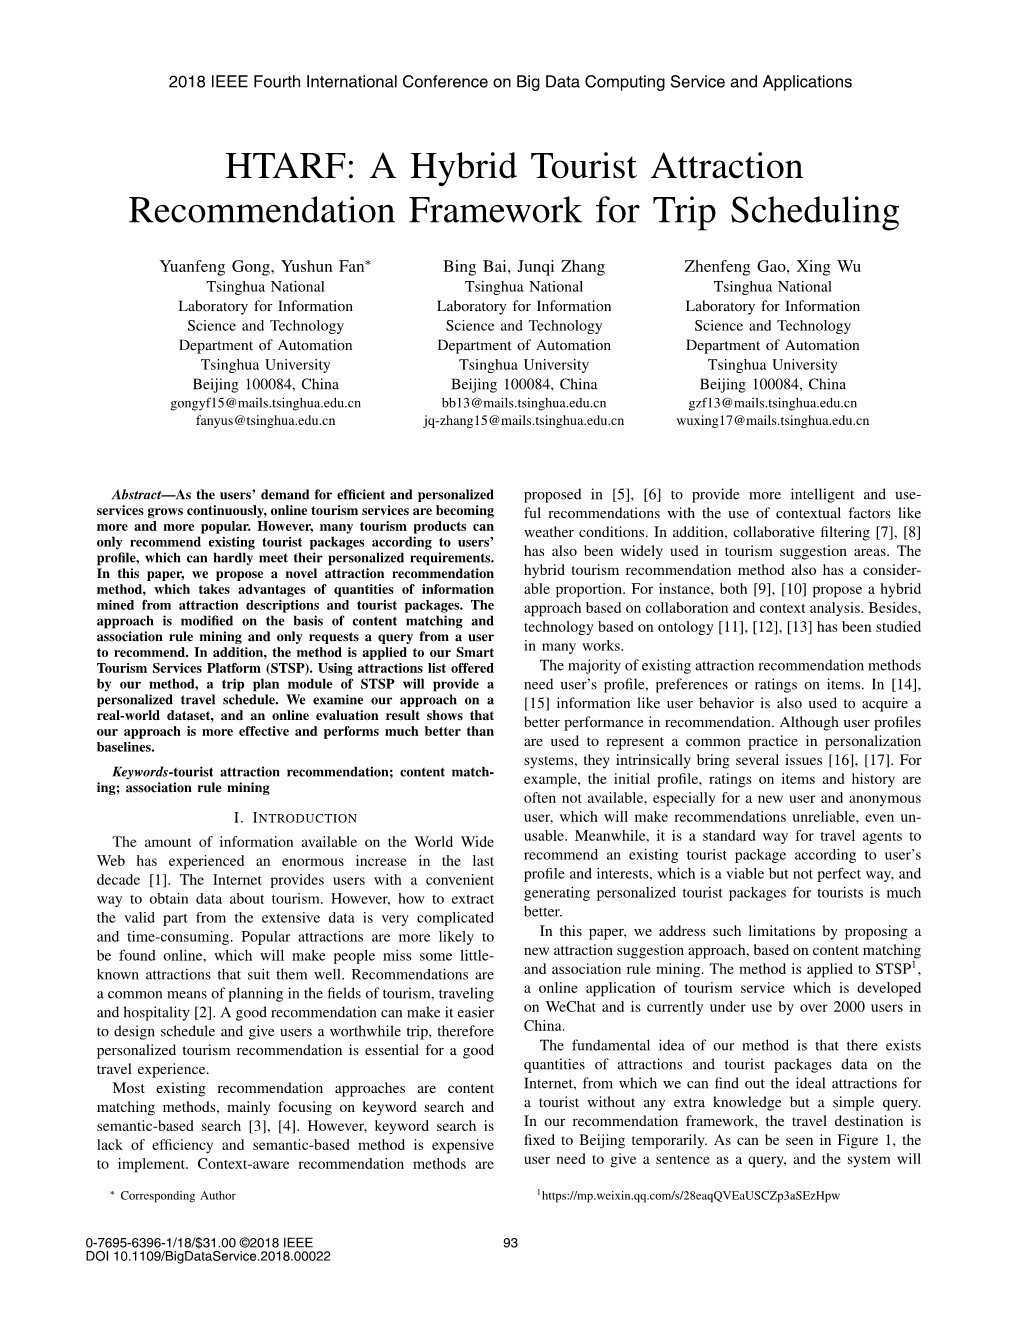 A Hybrid Tourist Attraction Recommendation Framework for Trip Scheduling